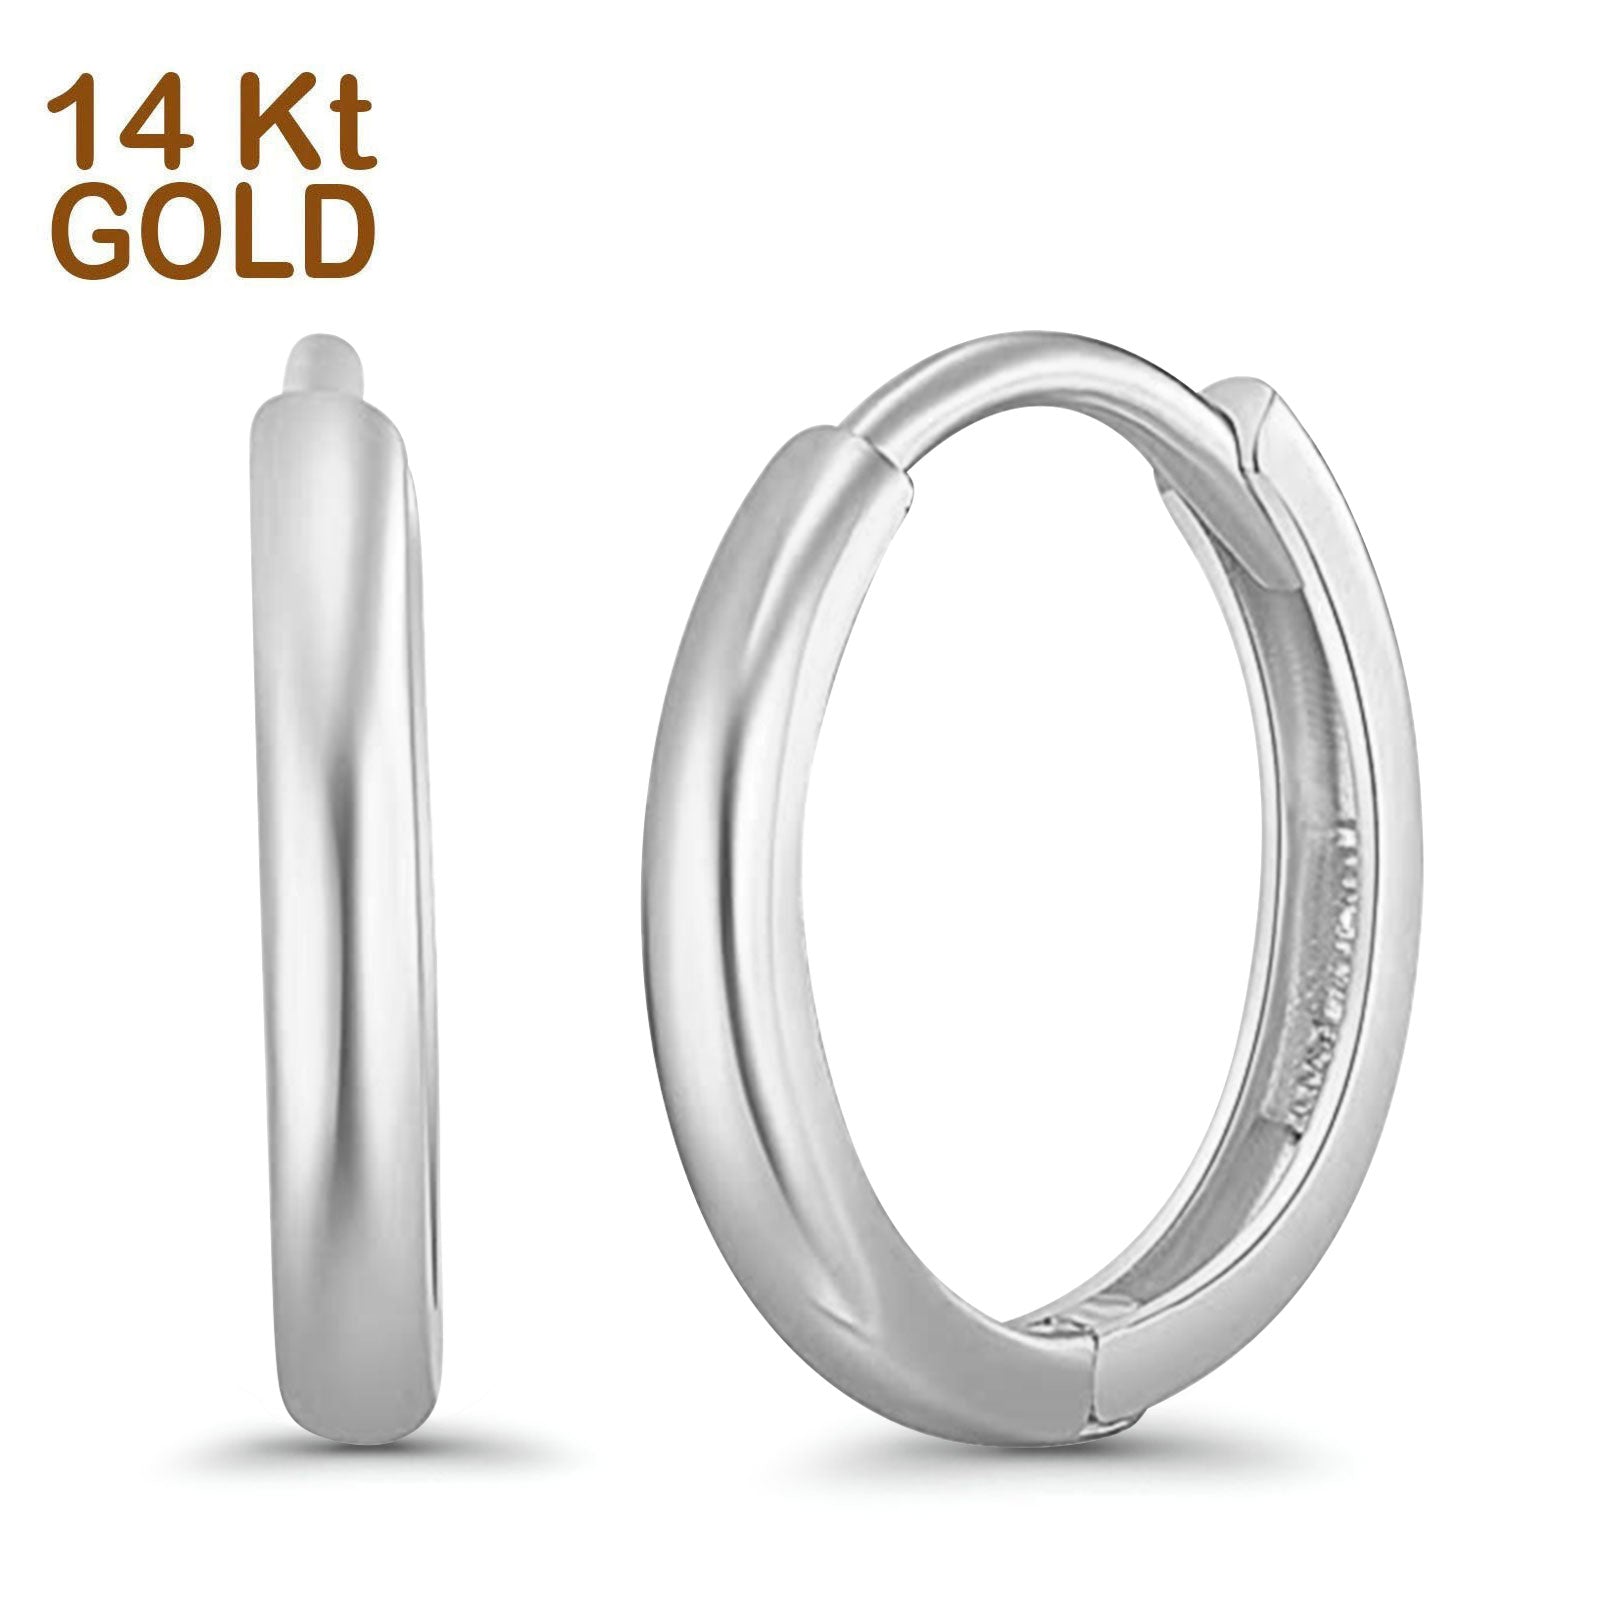 14k White Gold Round Hoop Huggie Earrings - 3 Different Size Available, Best Birthday Gift for Her